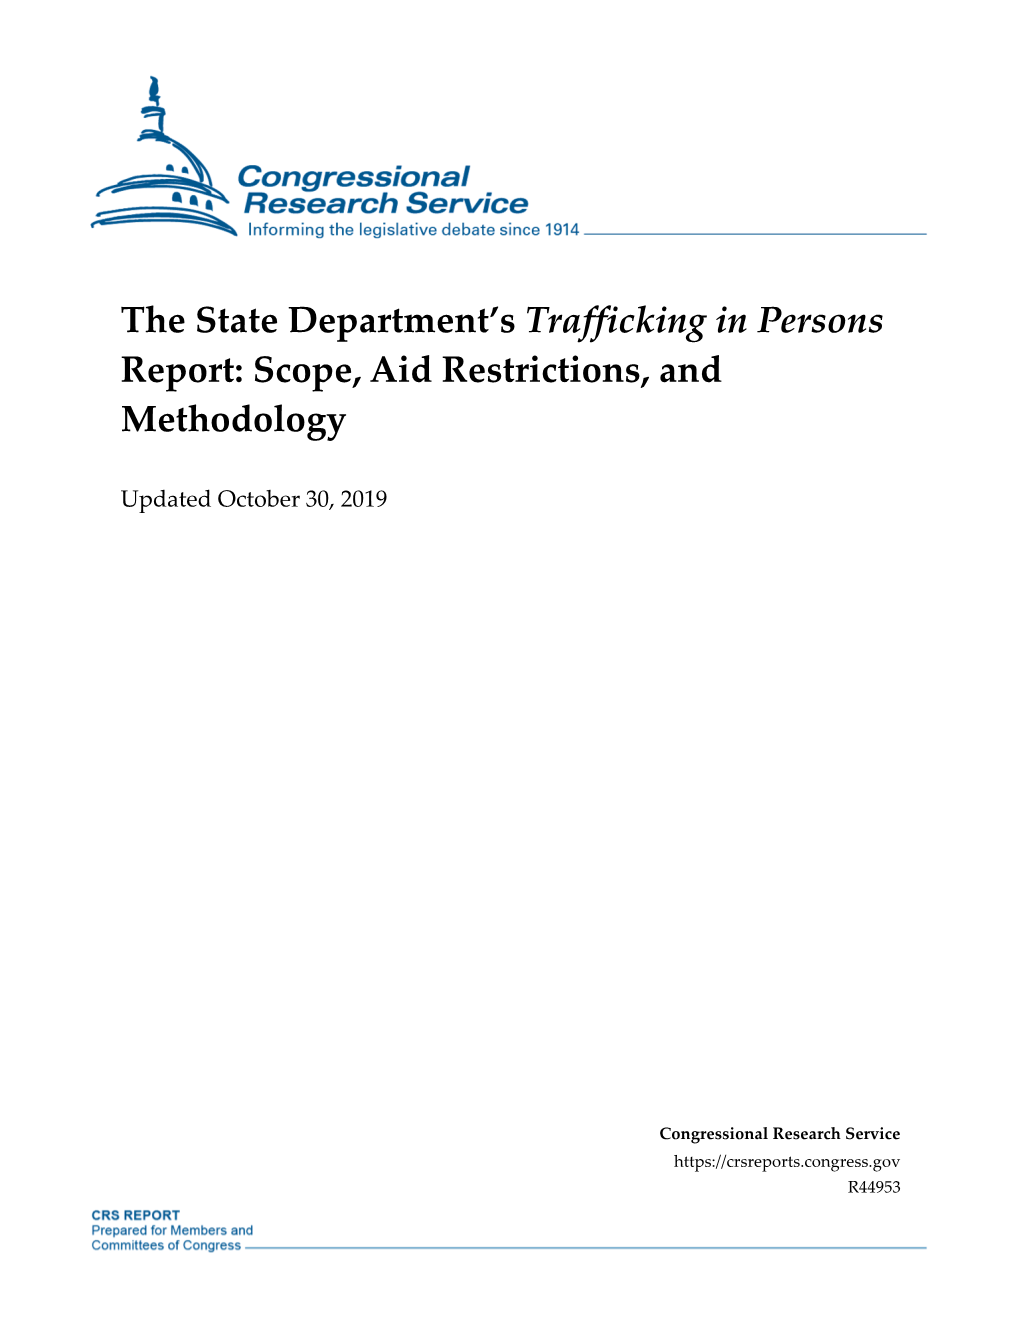 The State Department's Trafficking In